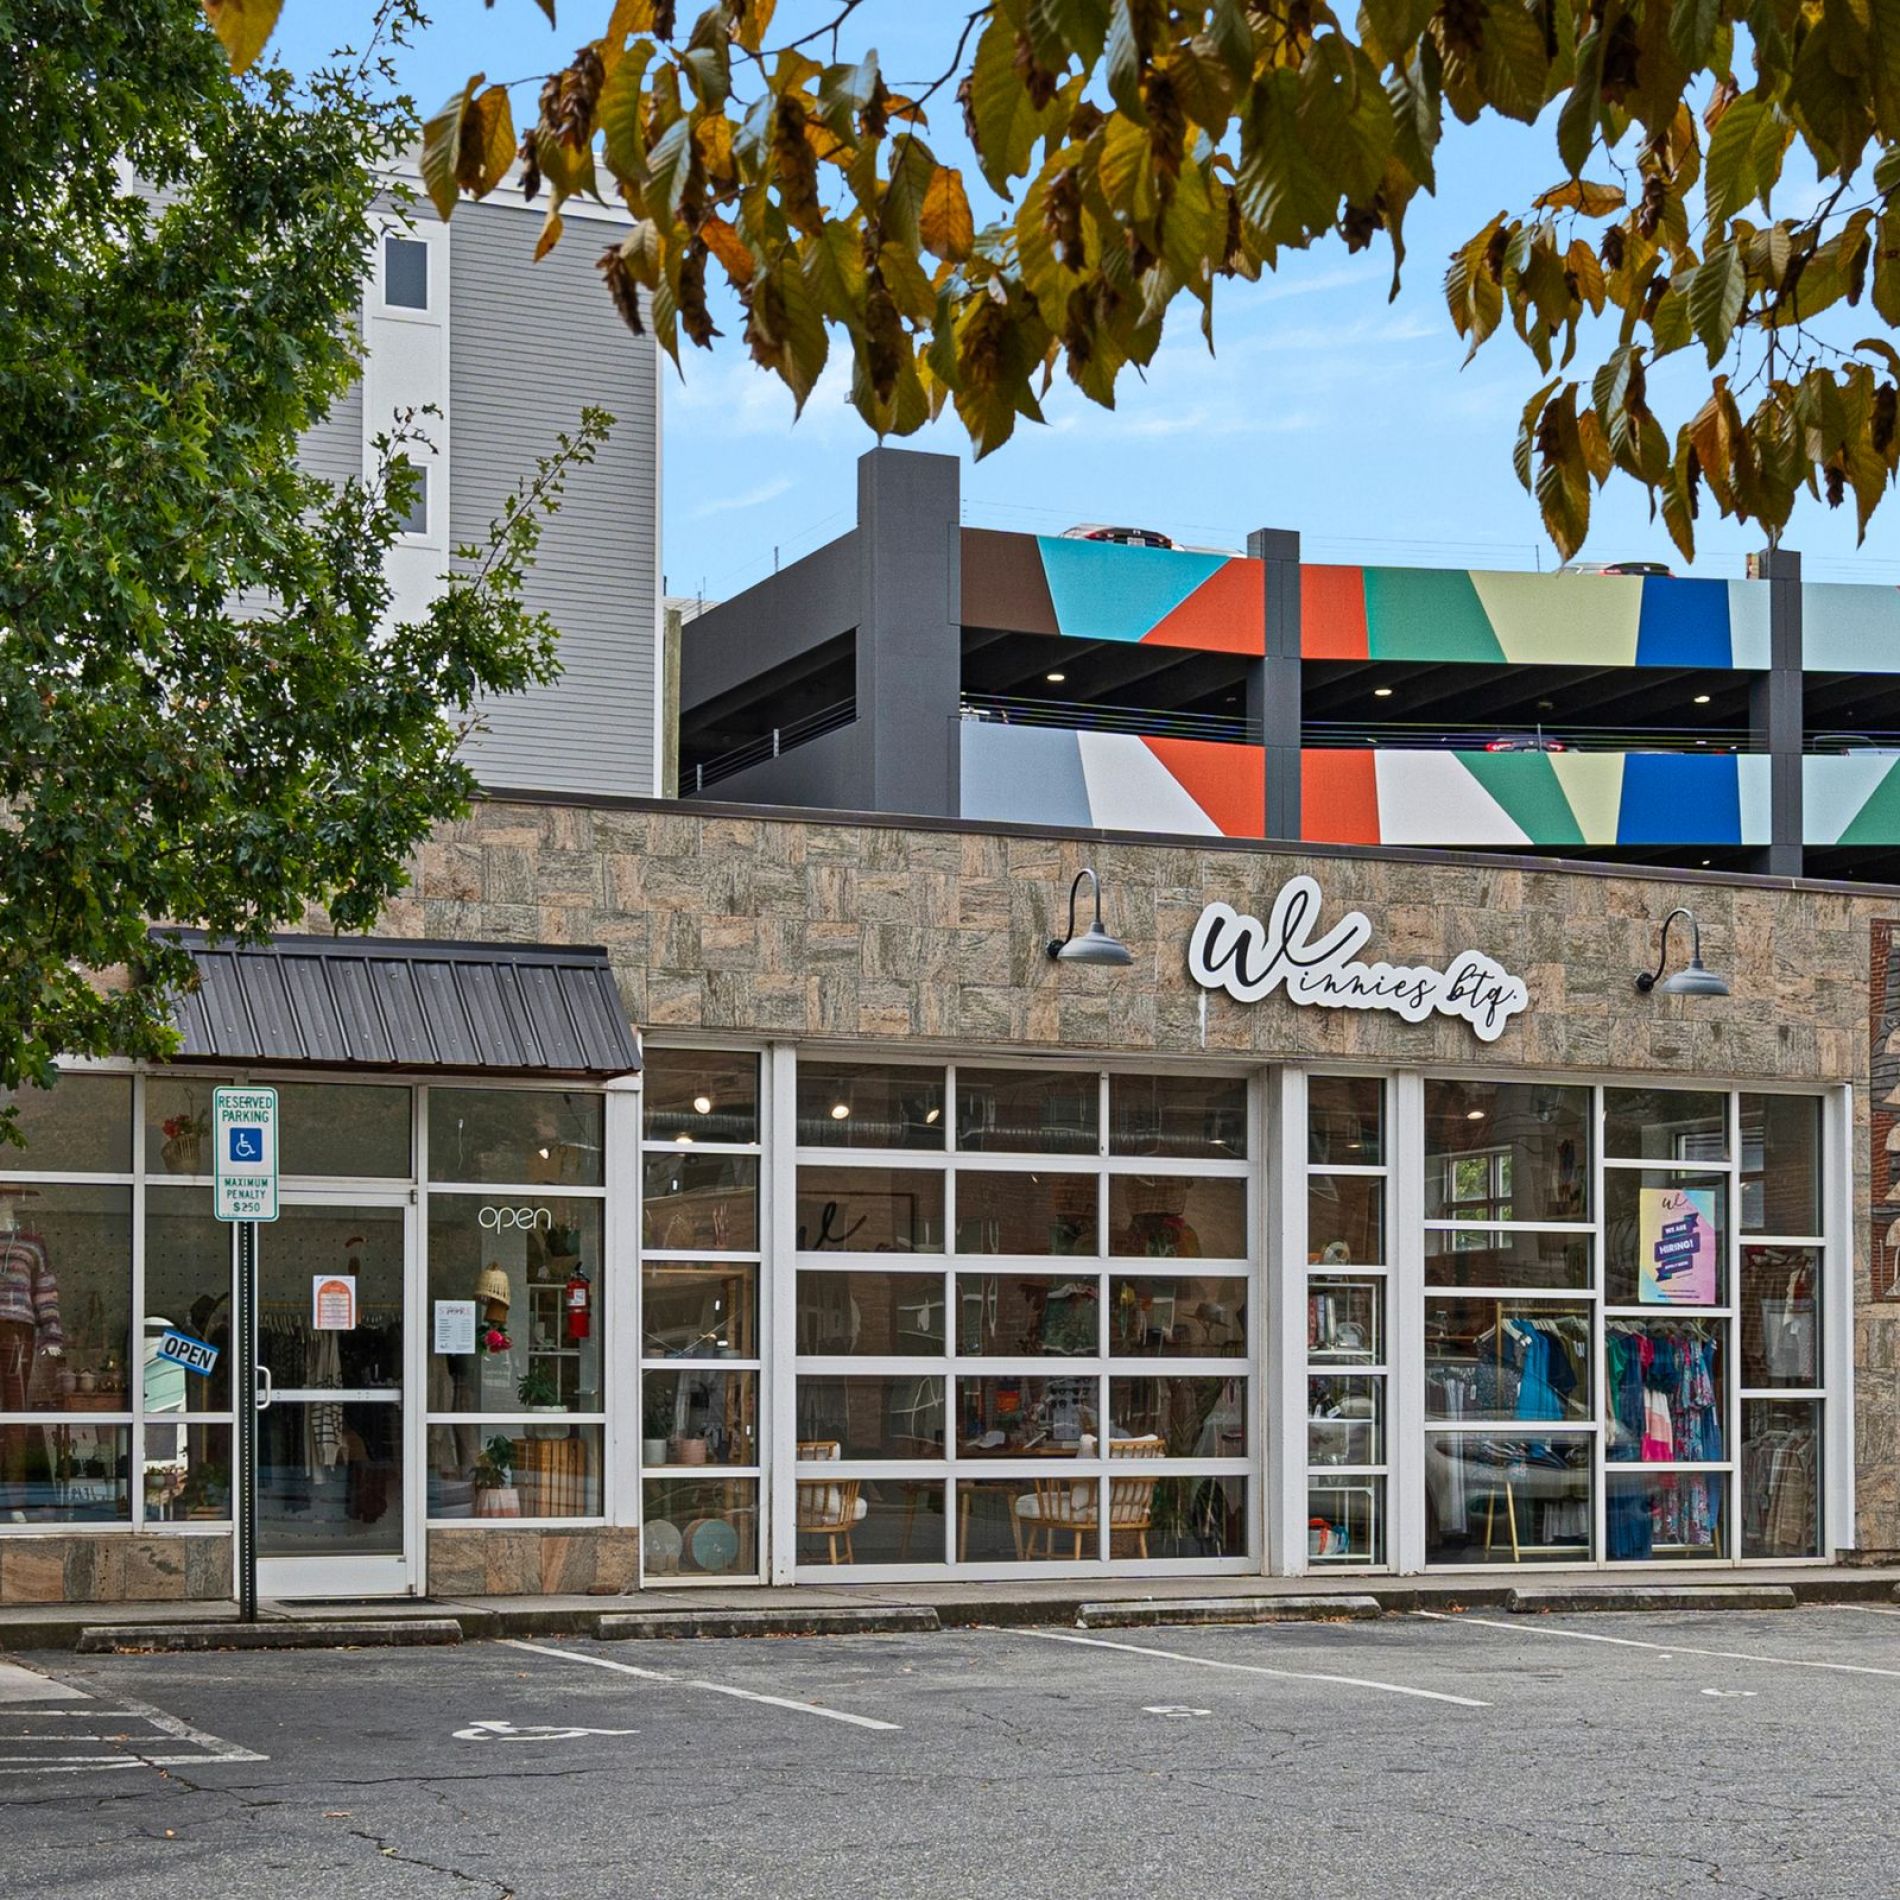 Exterior of building in Plaza Midwood, NC